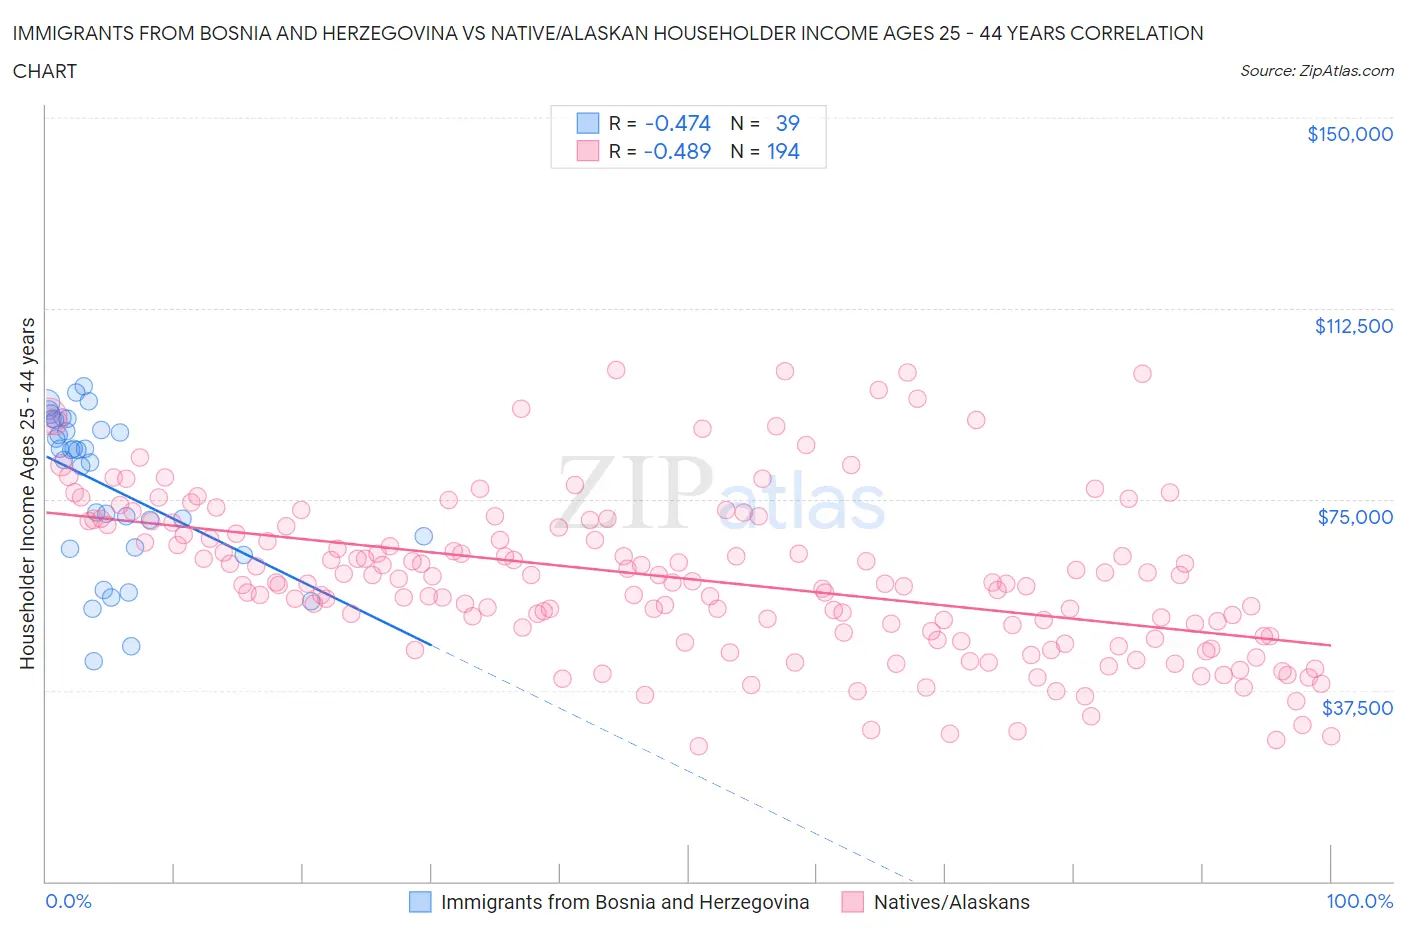 Immigrants from Bosnia and Herzegovina vs Native/Alaskan Householder Income Ages 25 - 44 years